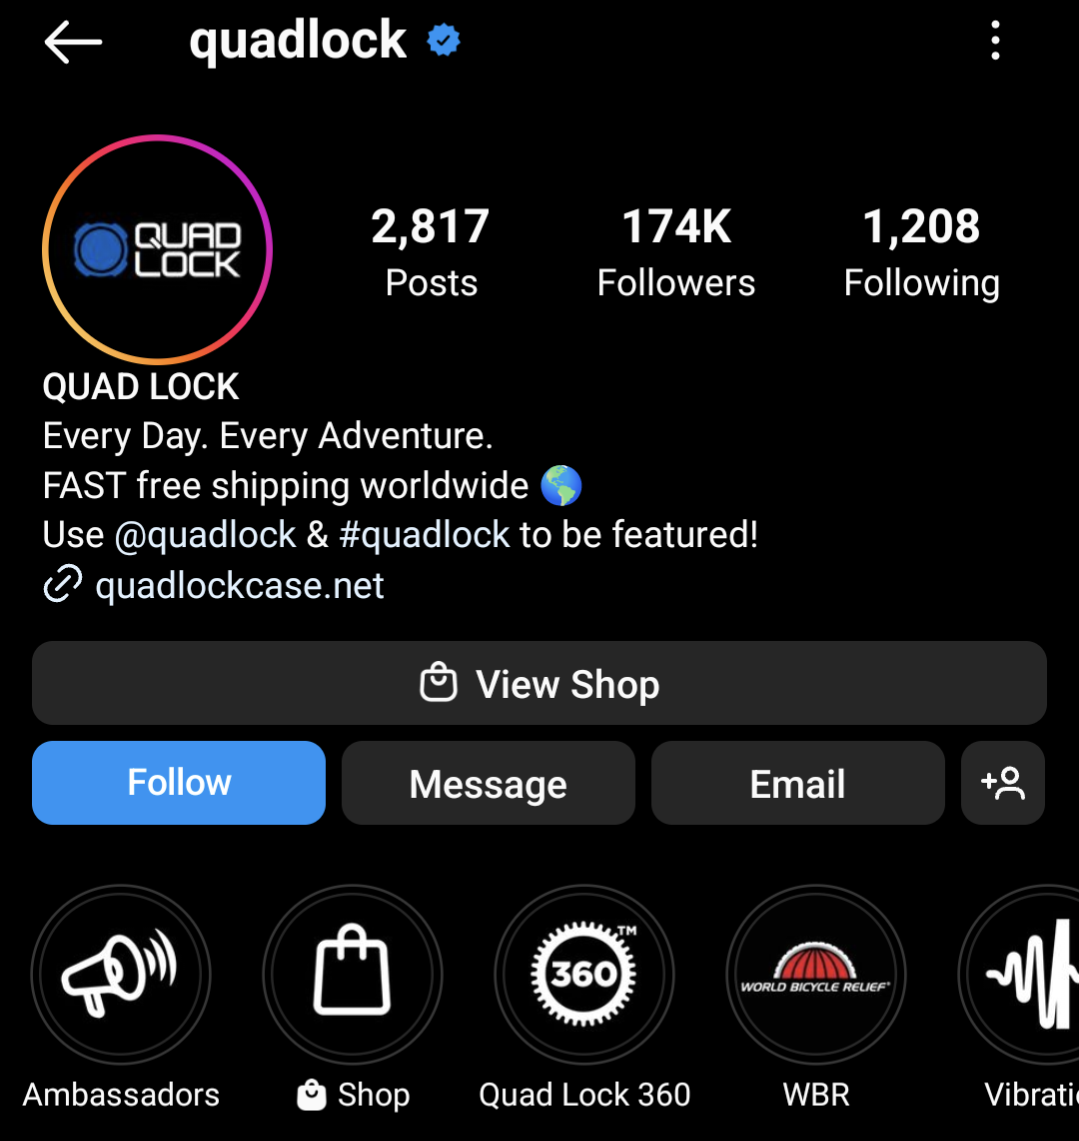 Quad Lock uses a uniform design for the story thumbnails in its Instagram bio